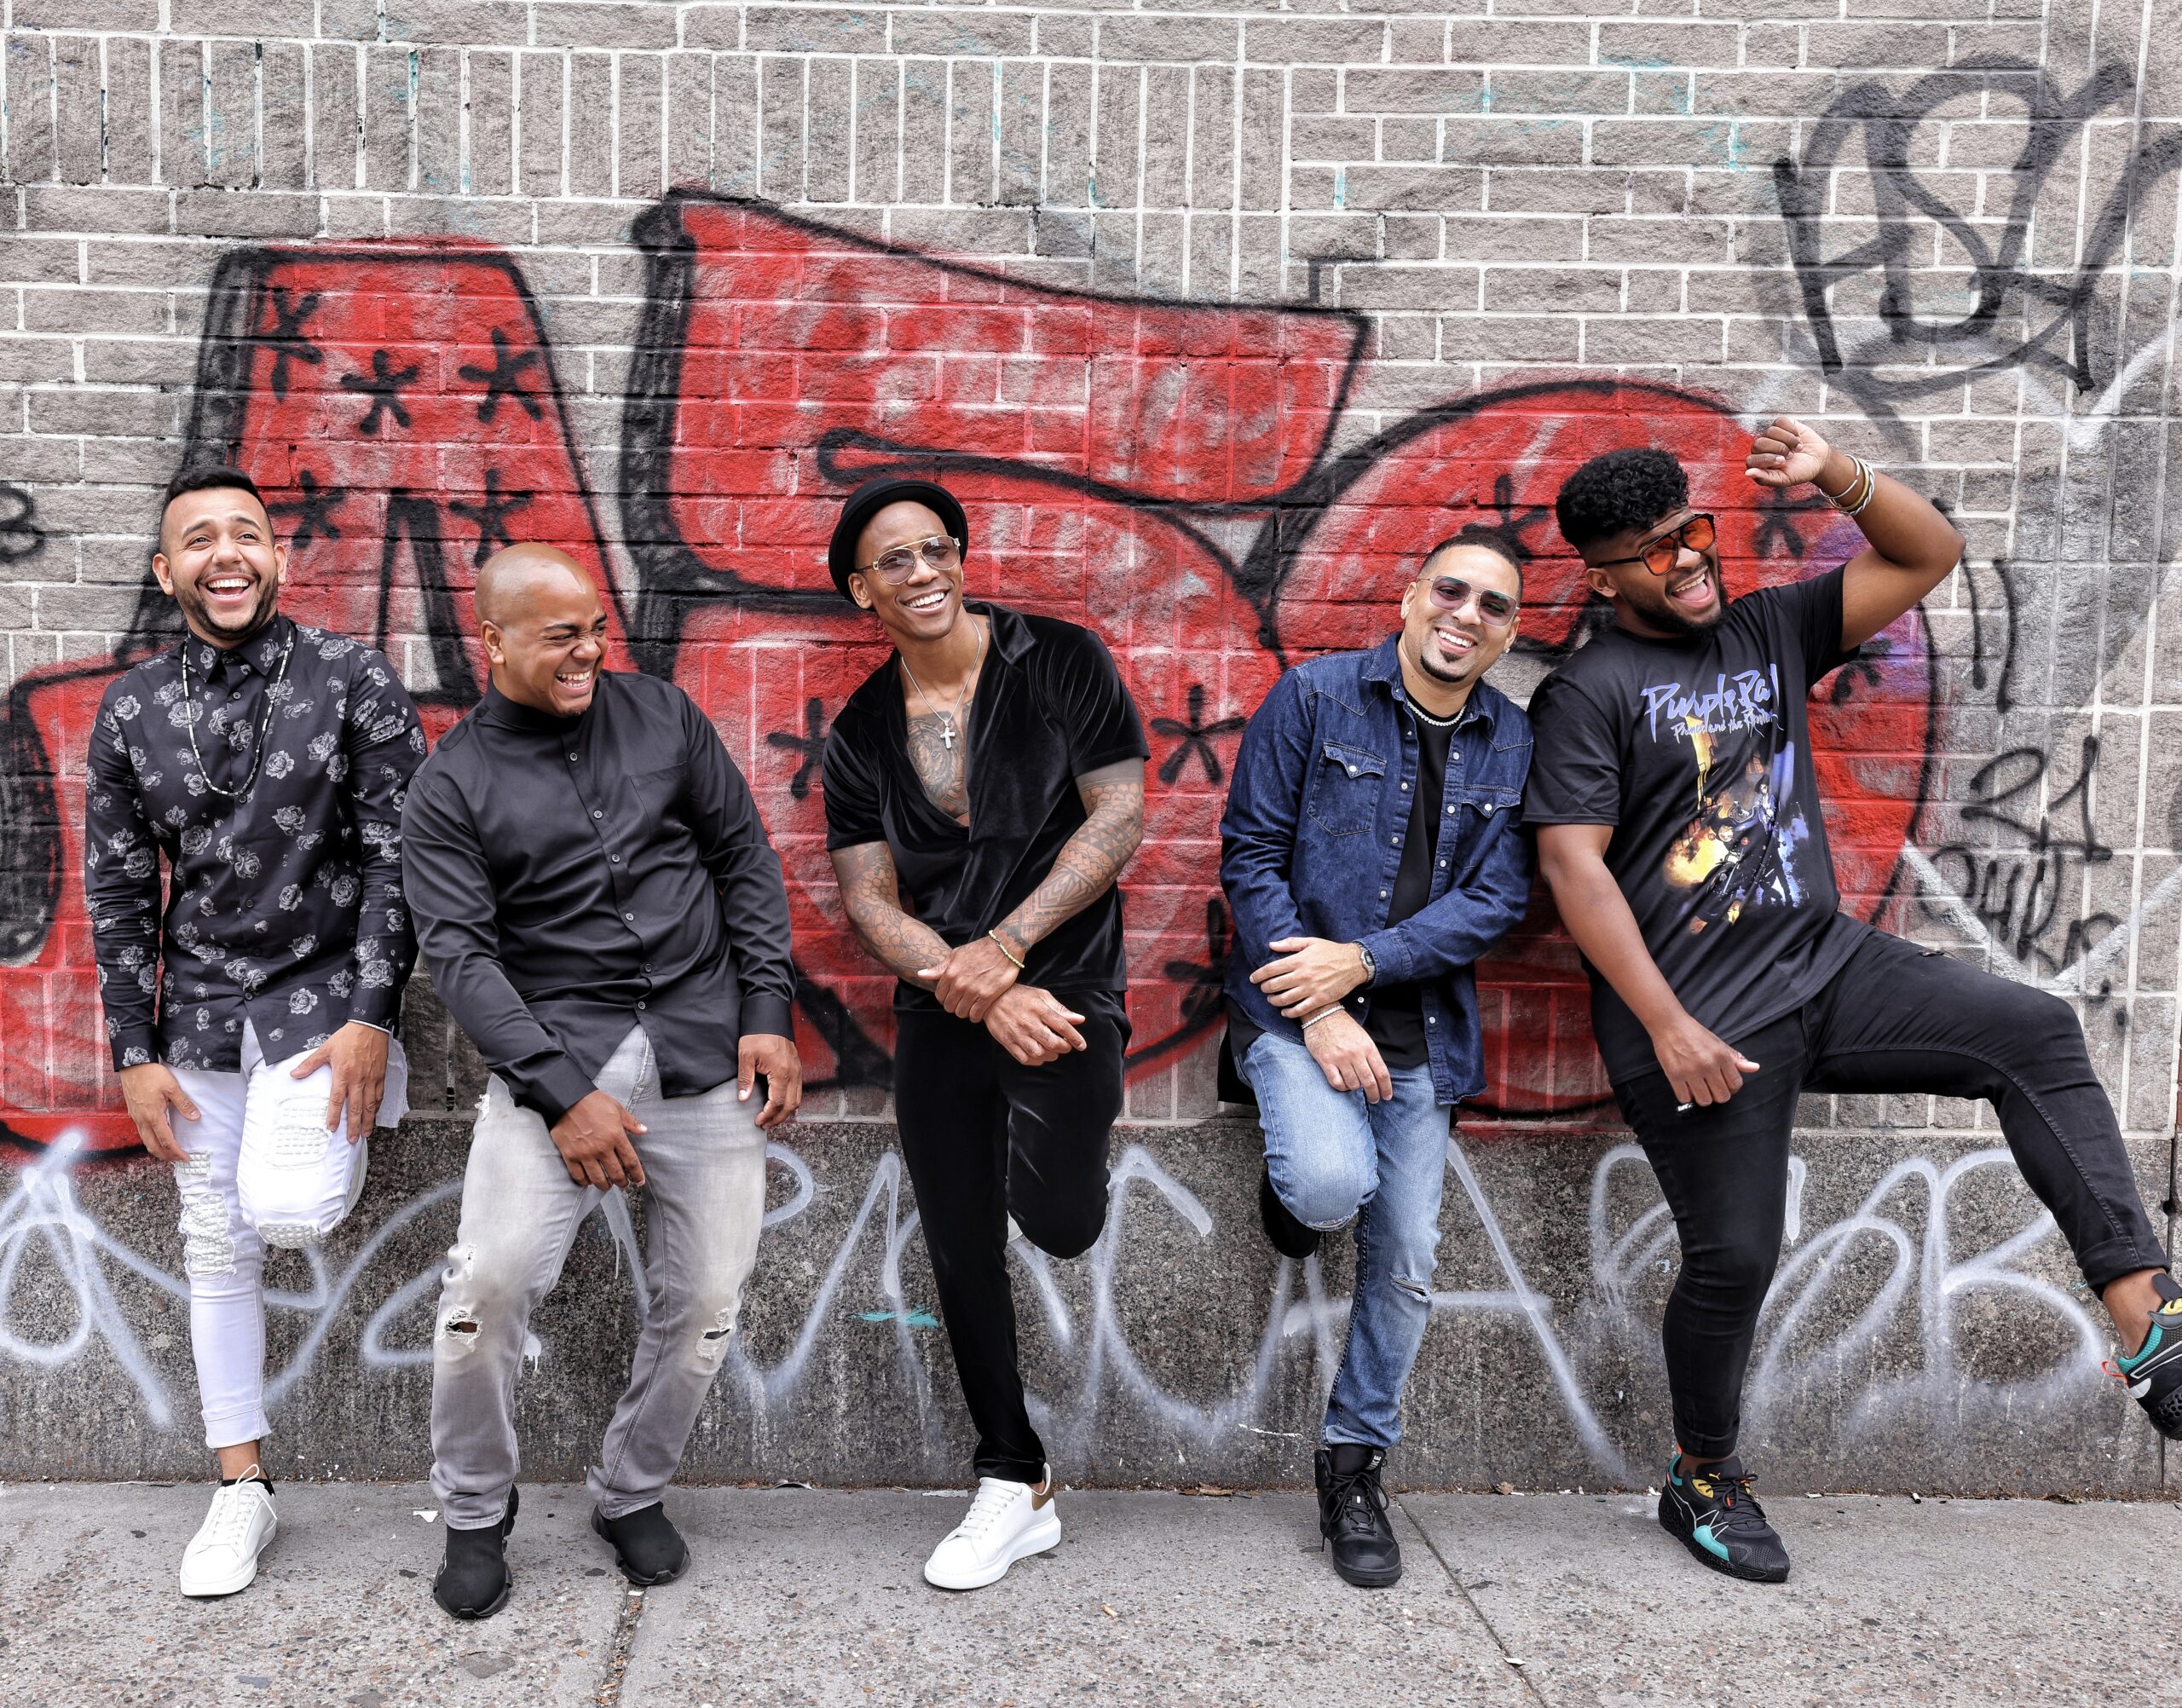 Pedrito Martinez and his band laughing in front of graffiti.